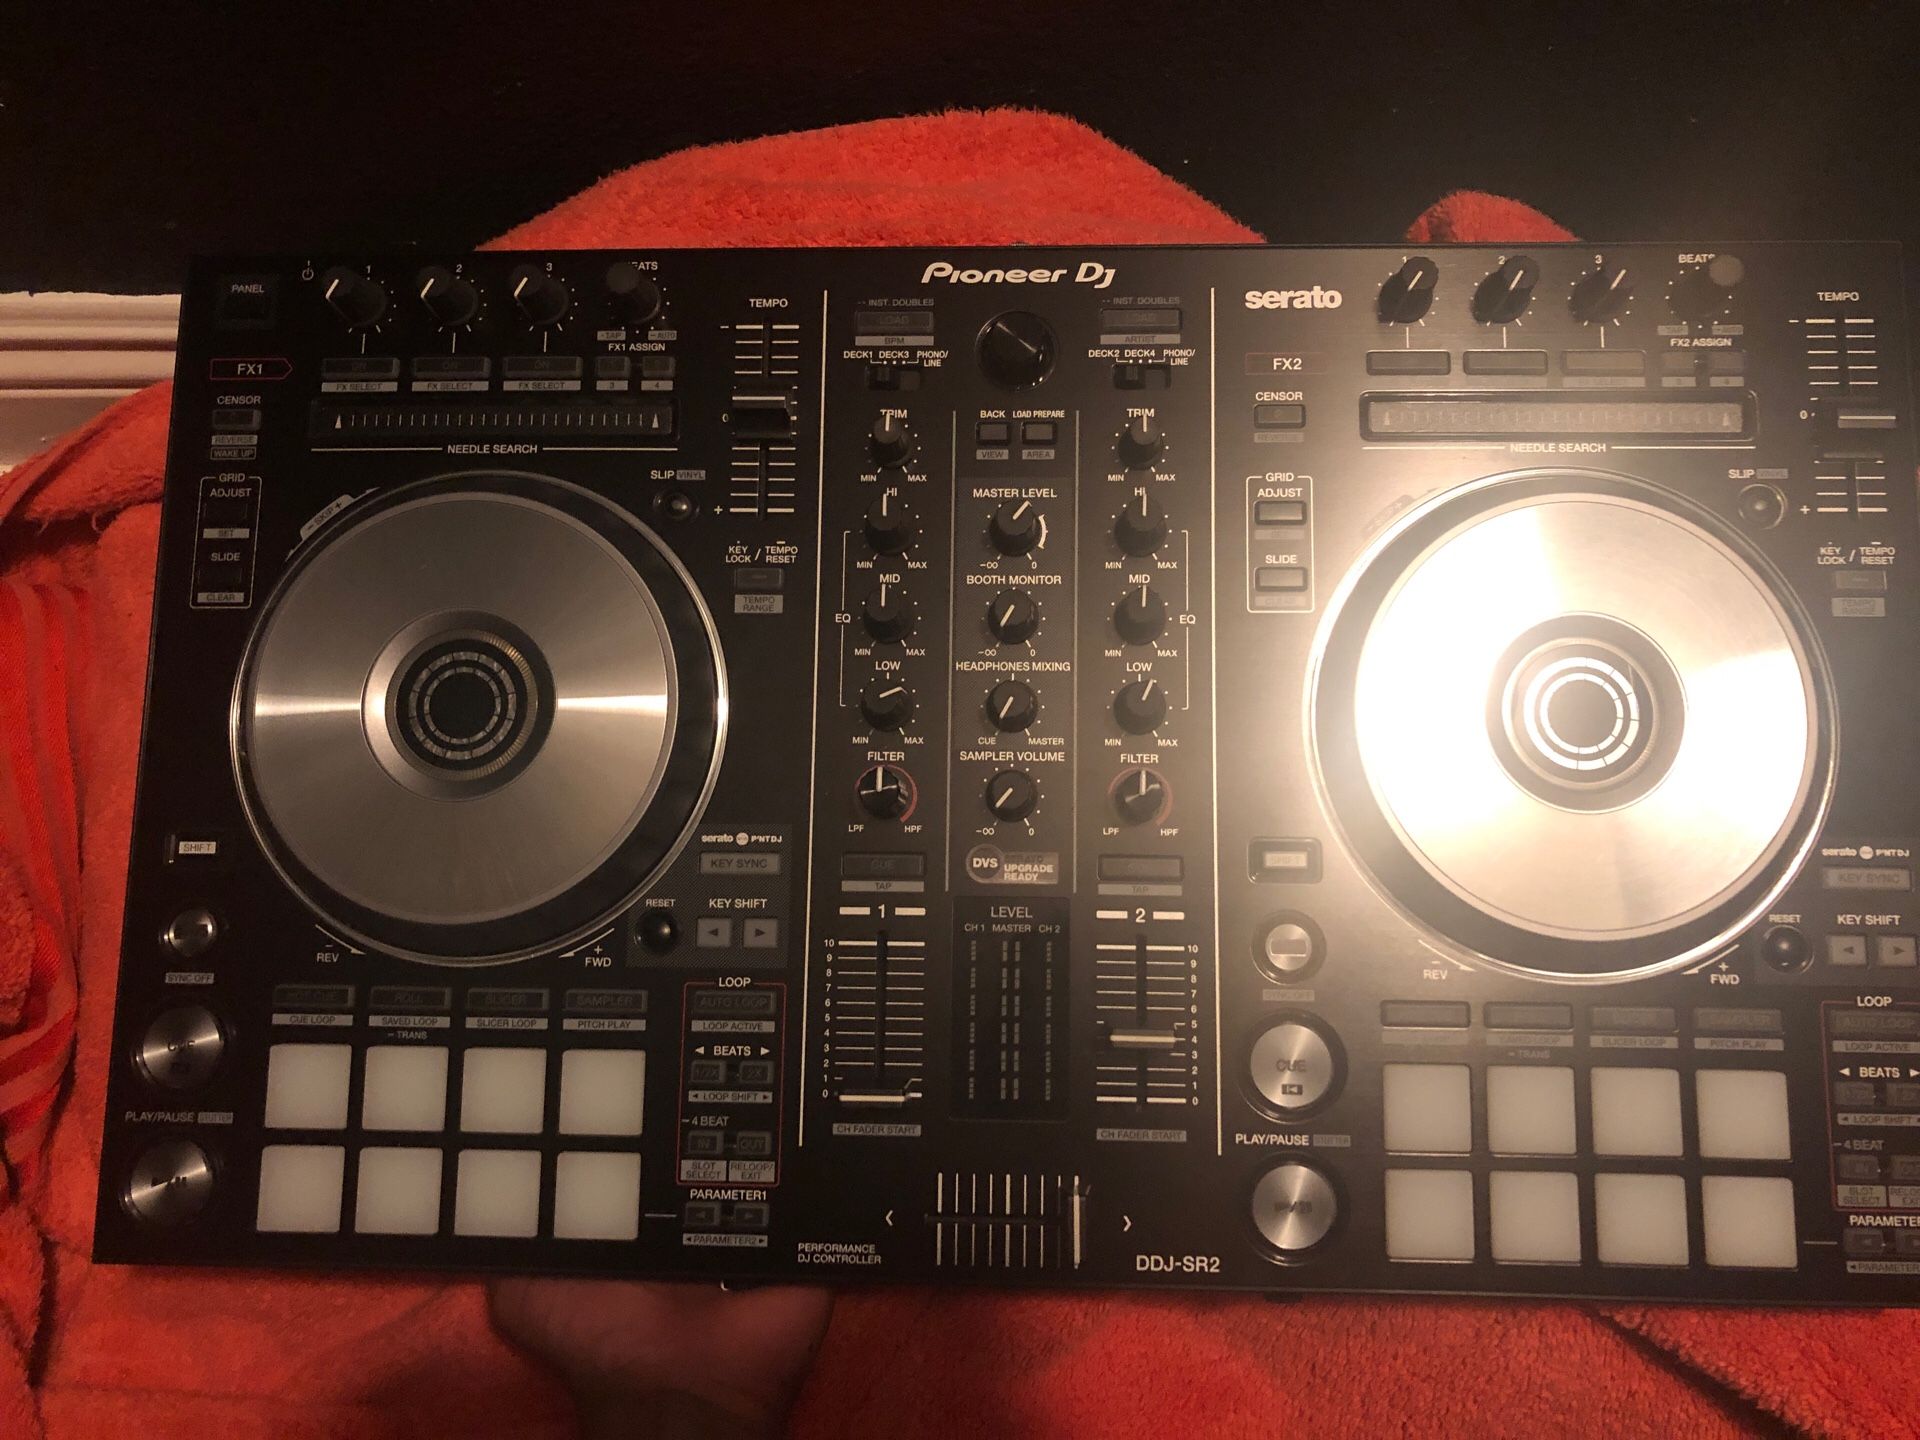 Pioneer DDJ-SR2 2-channel Serato DJ Controller, brand new open box, took it out the box but never used it.